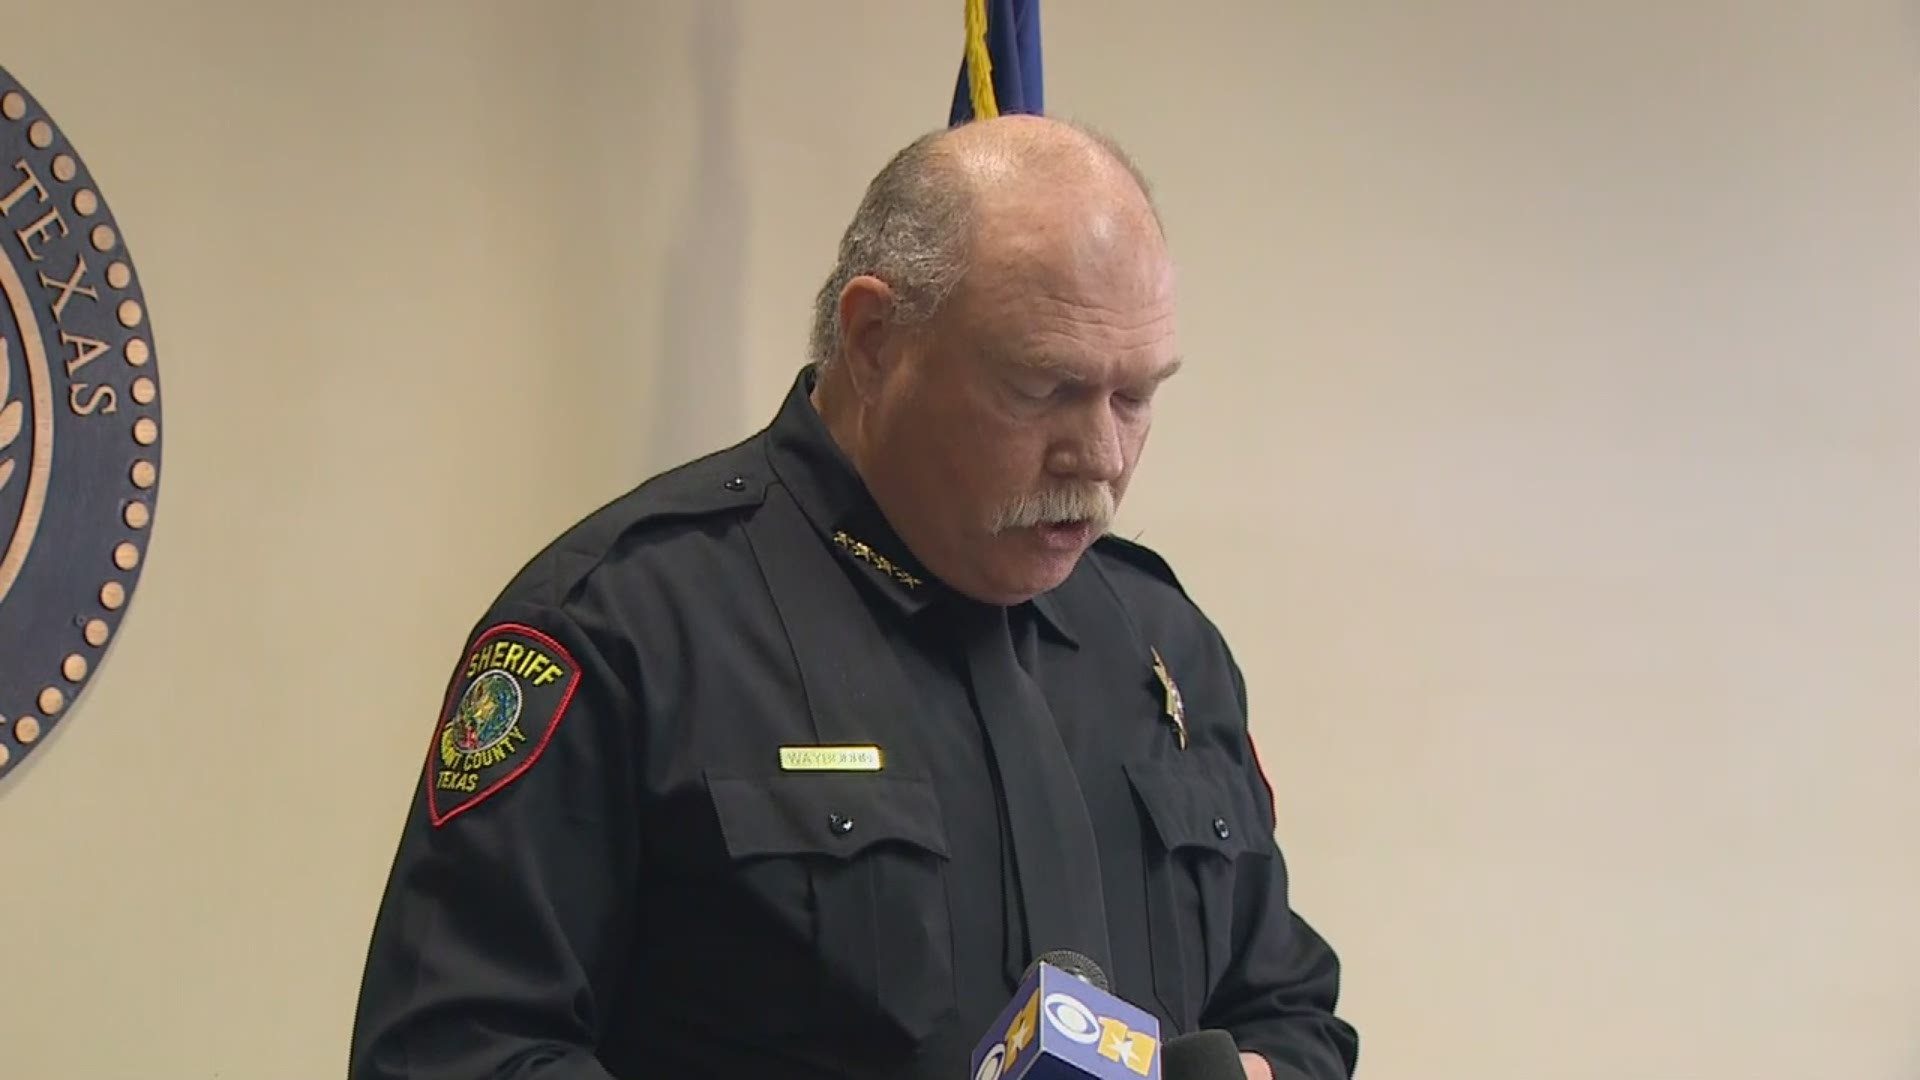 Tarrant County Sheriff Bill Waybourn announces the arrest of a 26-year-old father in connection to the death of a 2-month-old four days before Christmas.